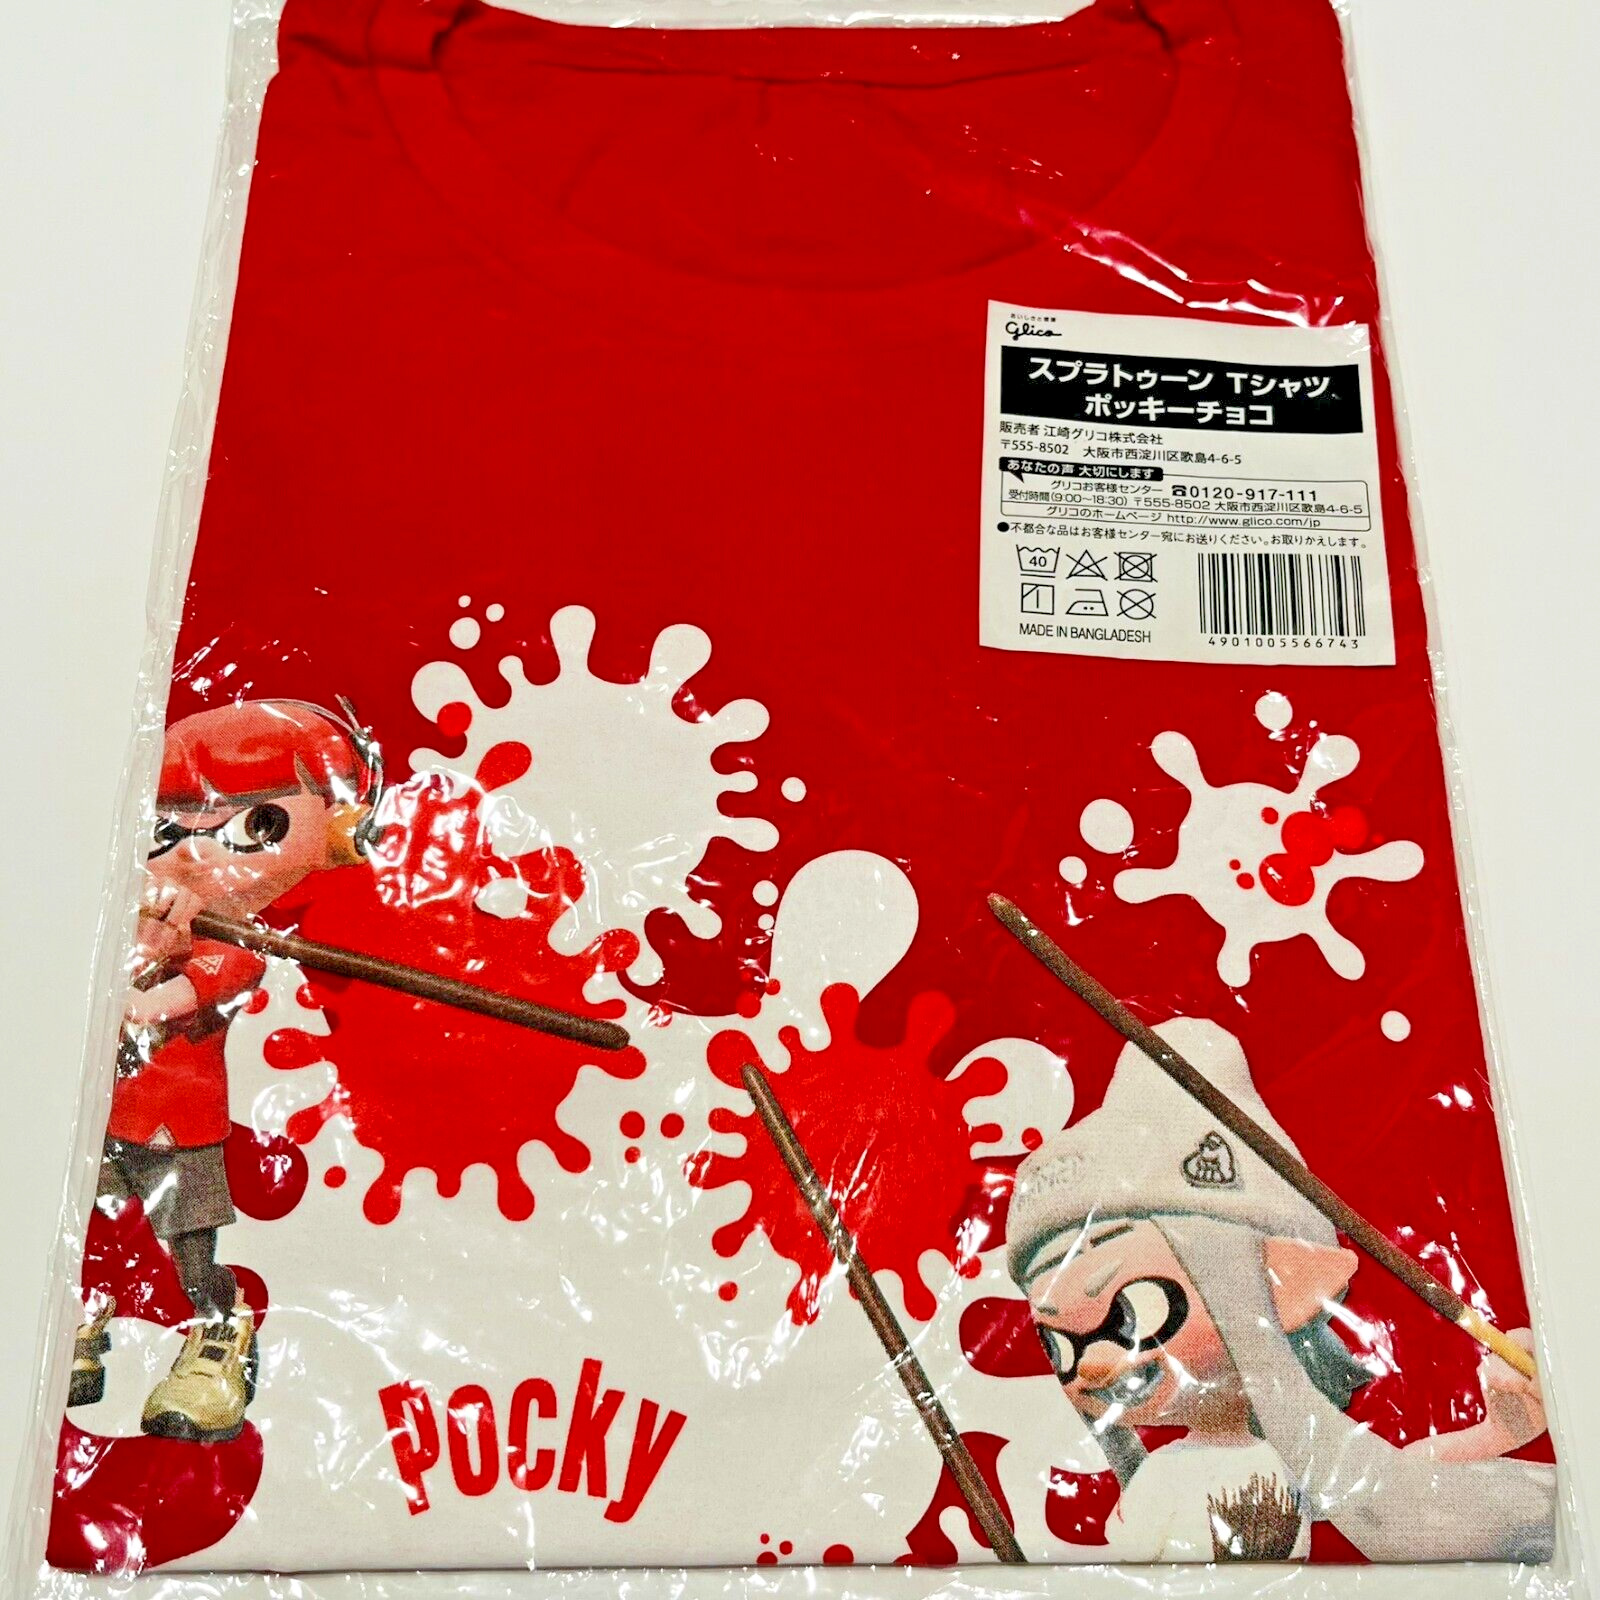 Splatoon 2 x Pocky Shirt *Official/NEW* Red version New and unused with tag